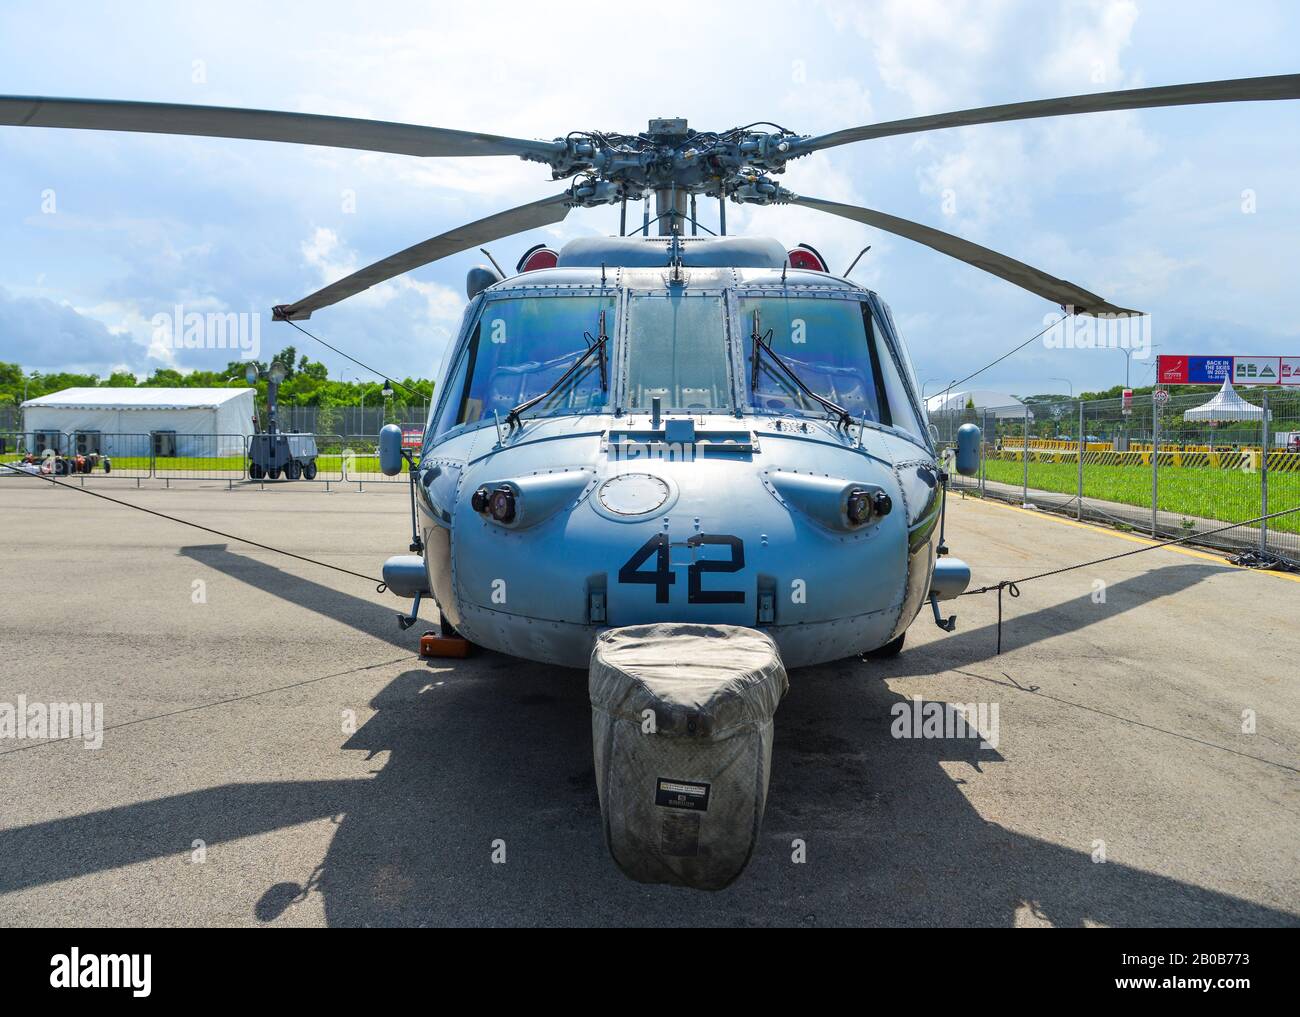 Singapore - Feb 12, 2020. Bell AH-1Z Viper attack helicopter of US Marine Corps for display in Changi, Singapore. Defense costs are increasing, especi Stock Photo